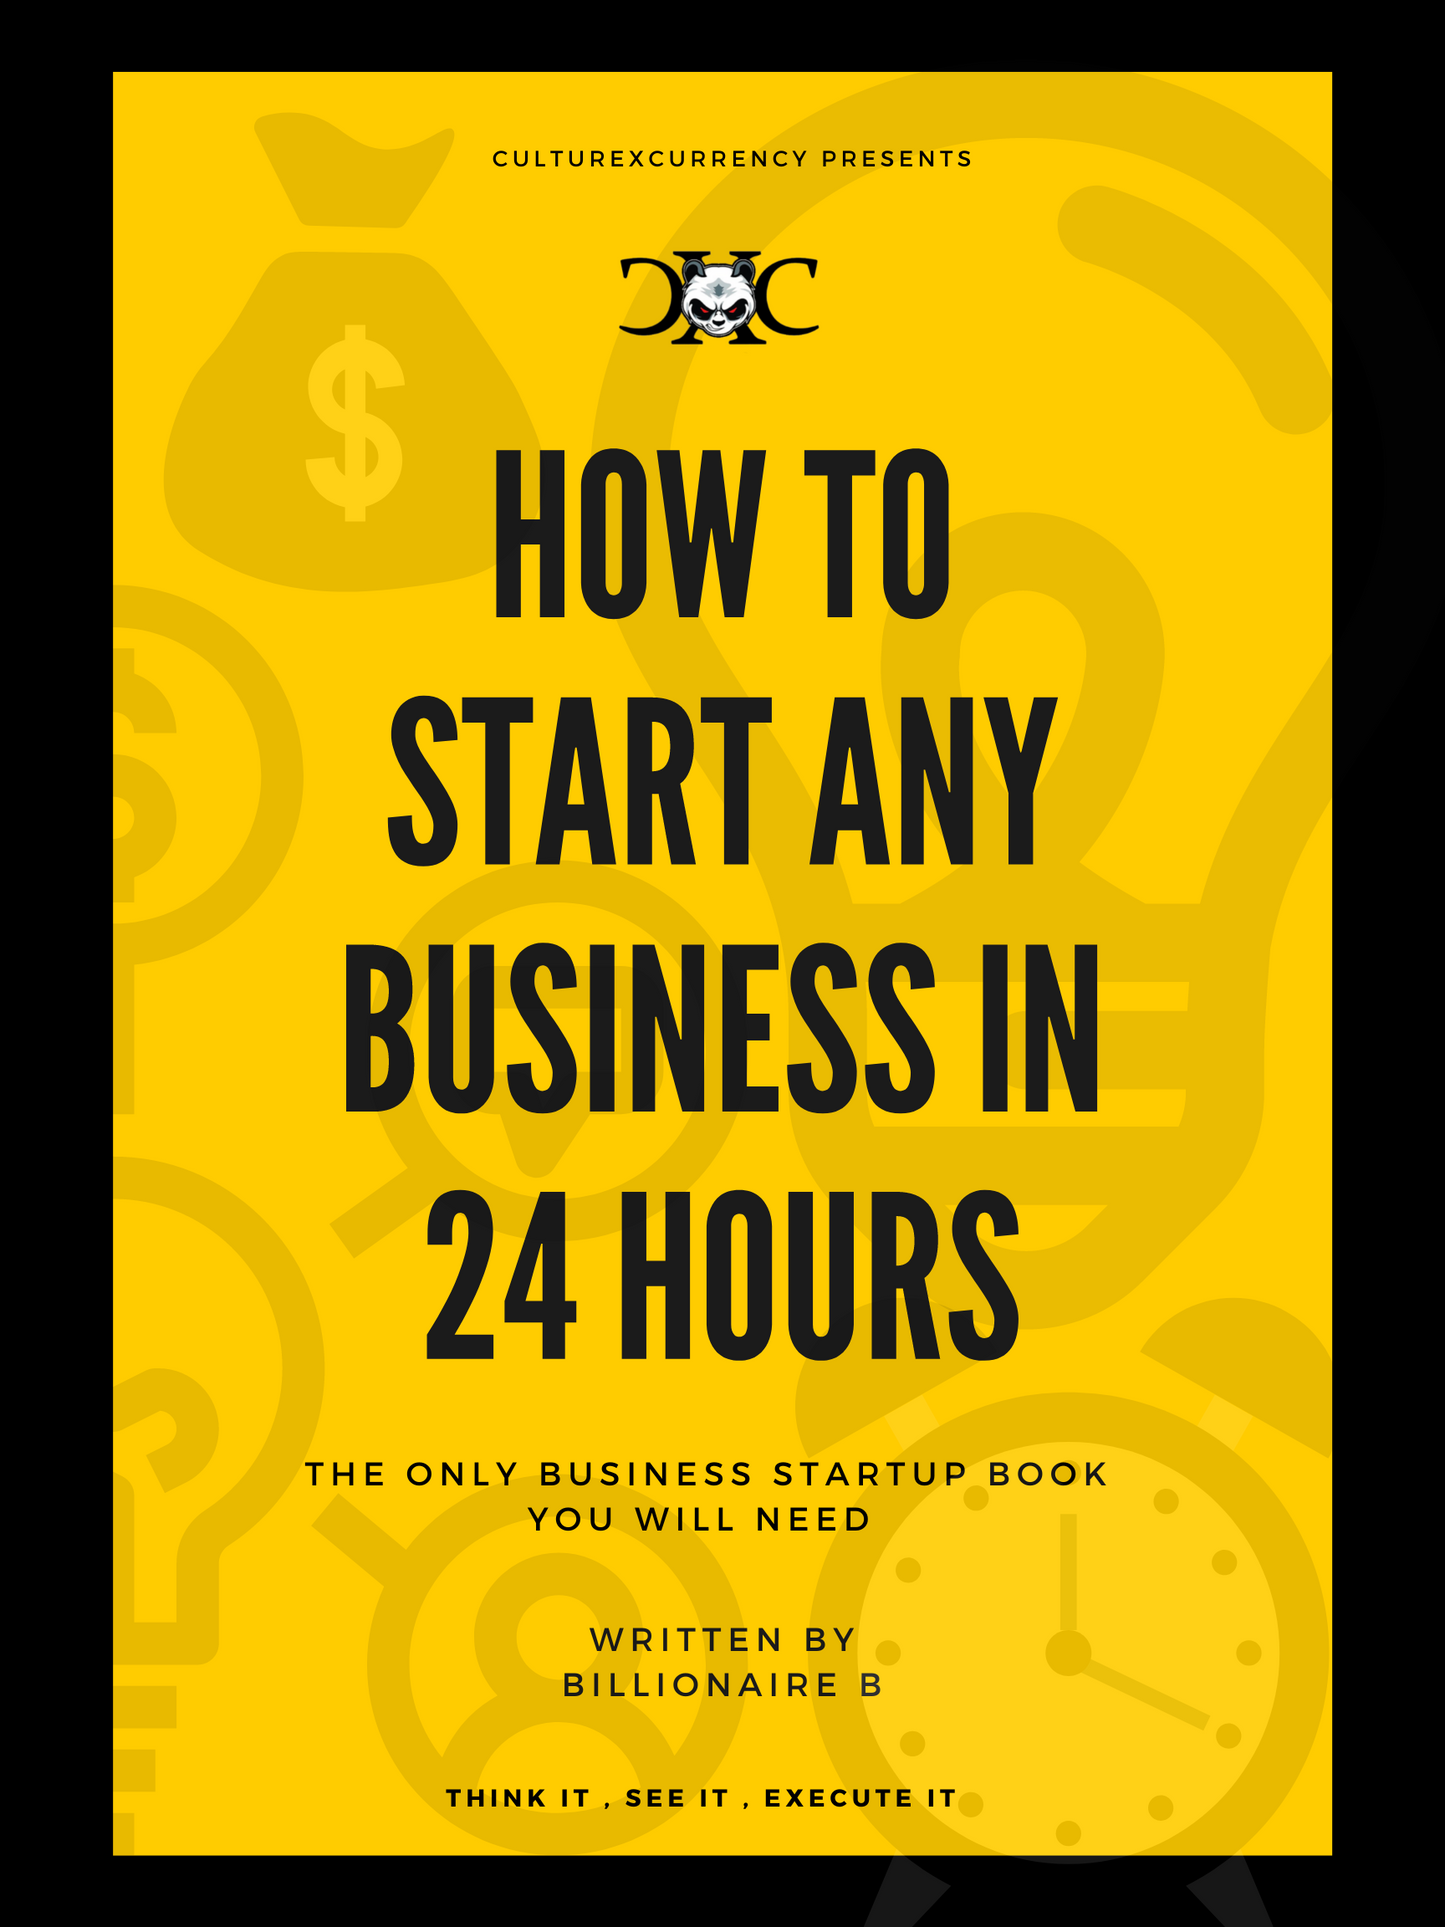 How To Start Any Business In 24hrs (CXC)